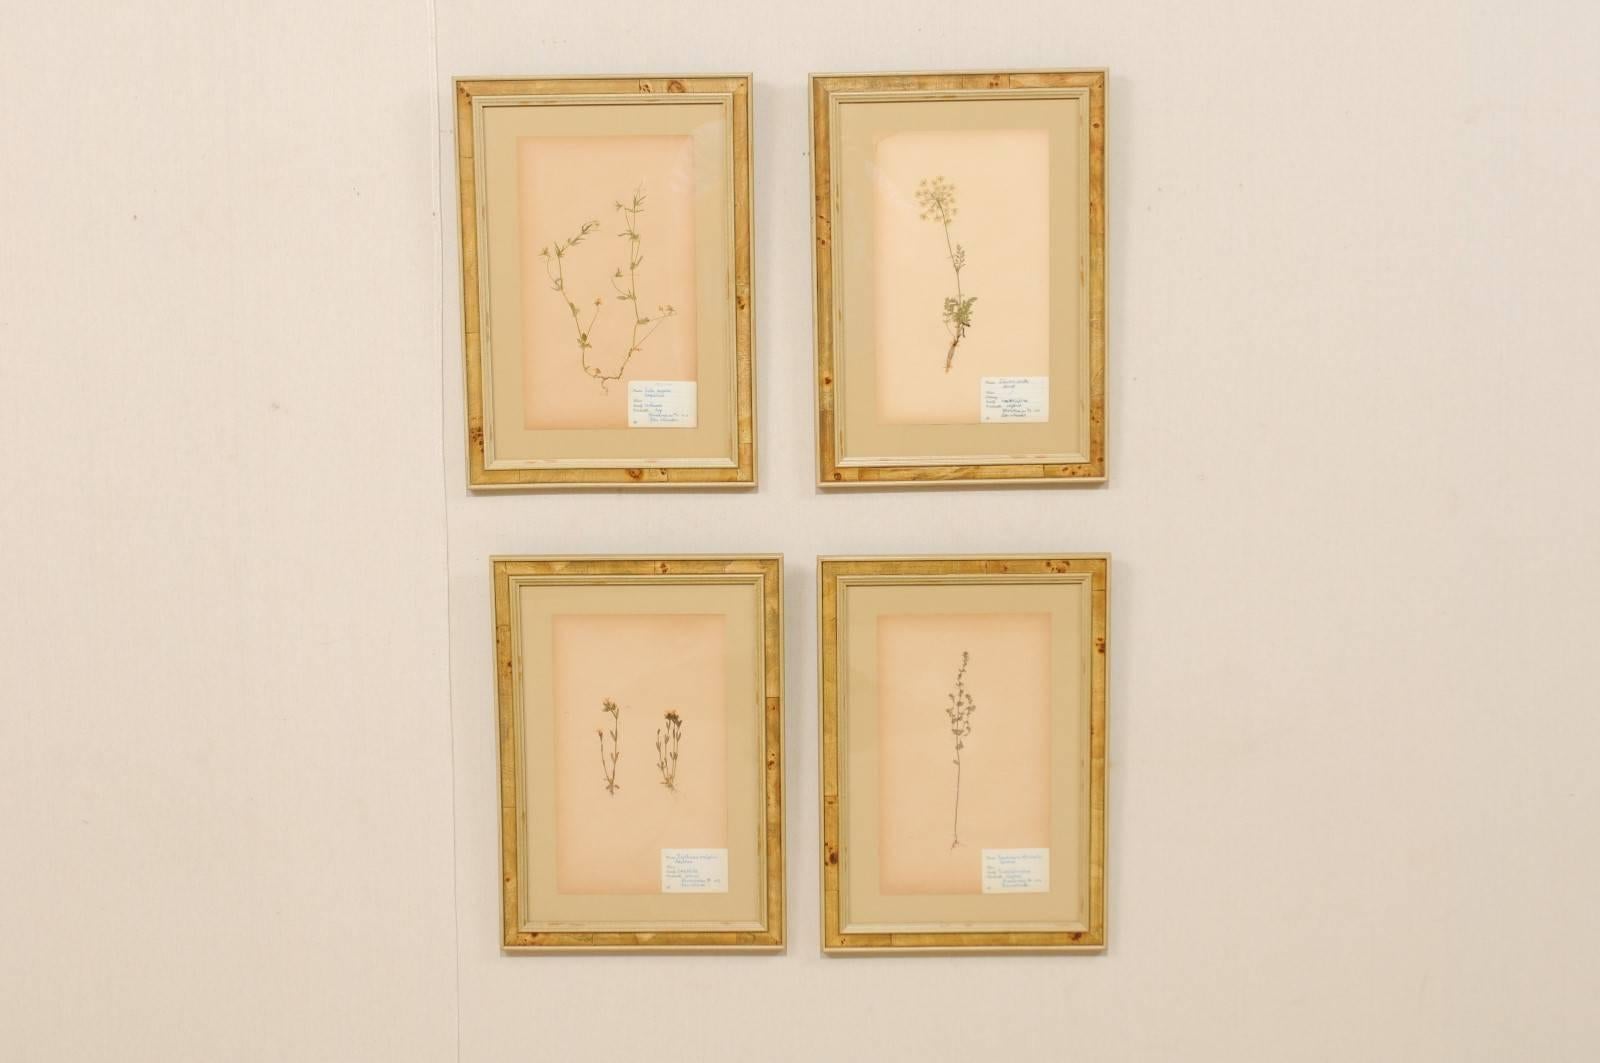 A set of four Swedish framed herbariums/botanicals from the mid-20th century. These Swedish 1950s herbariums are featured in custom light burl frames. Each pressed botanical specimens includes a hand written label with the plants name, variety,